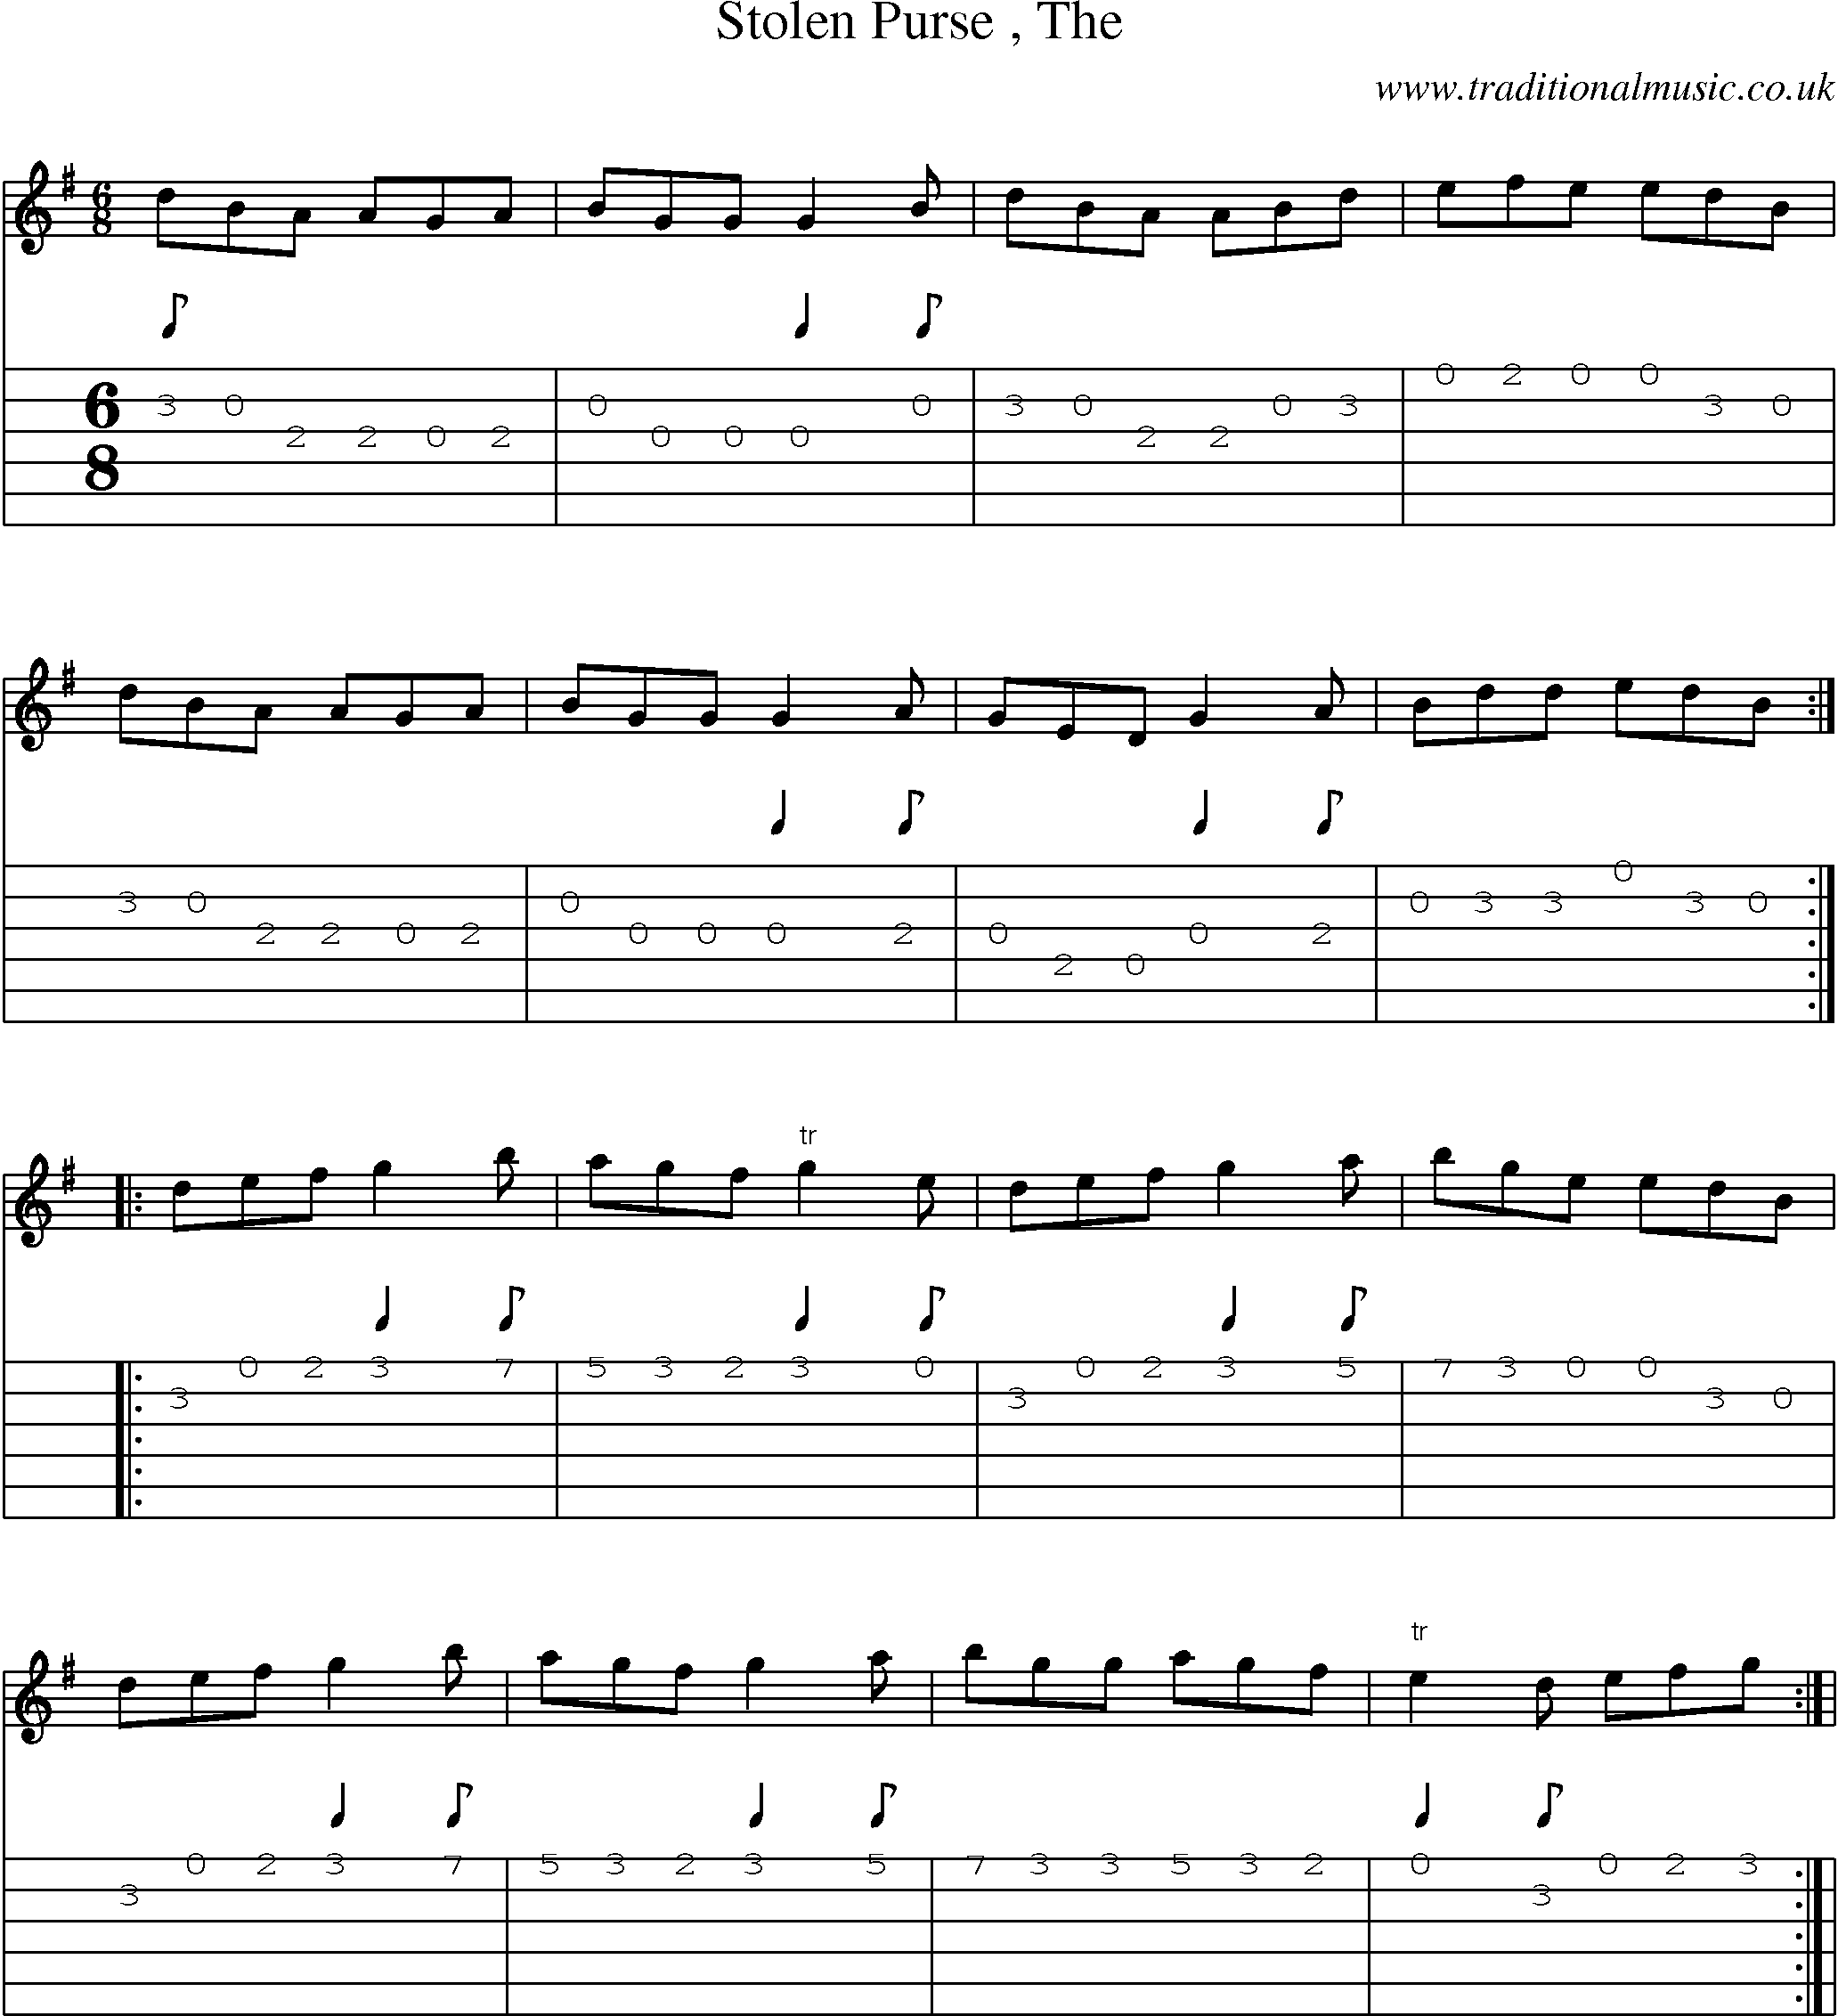 Music Score and Guitar Tabs for Stolen Purse